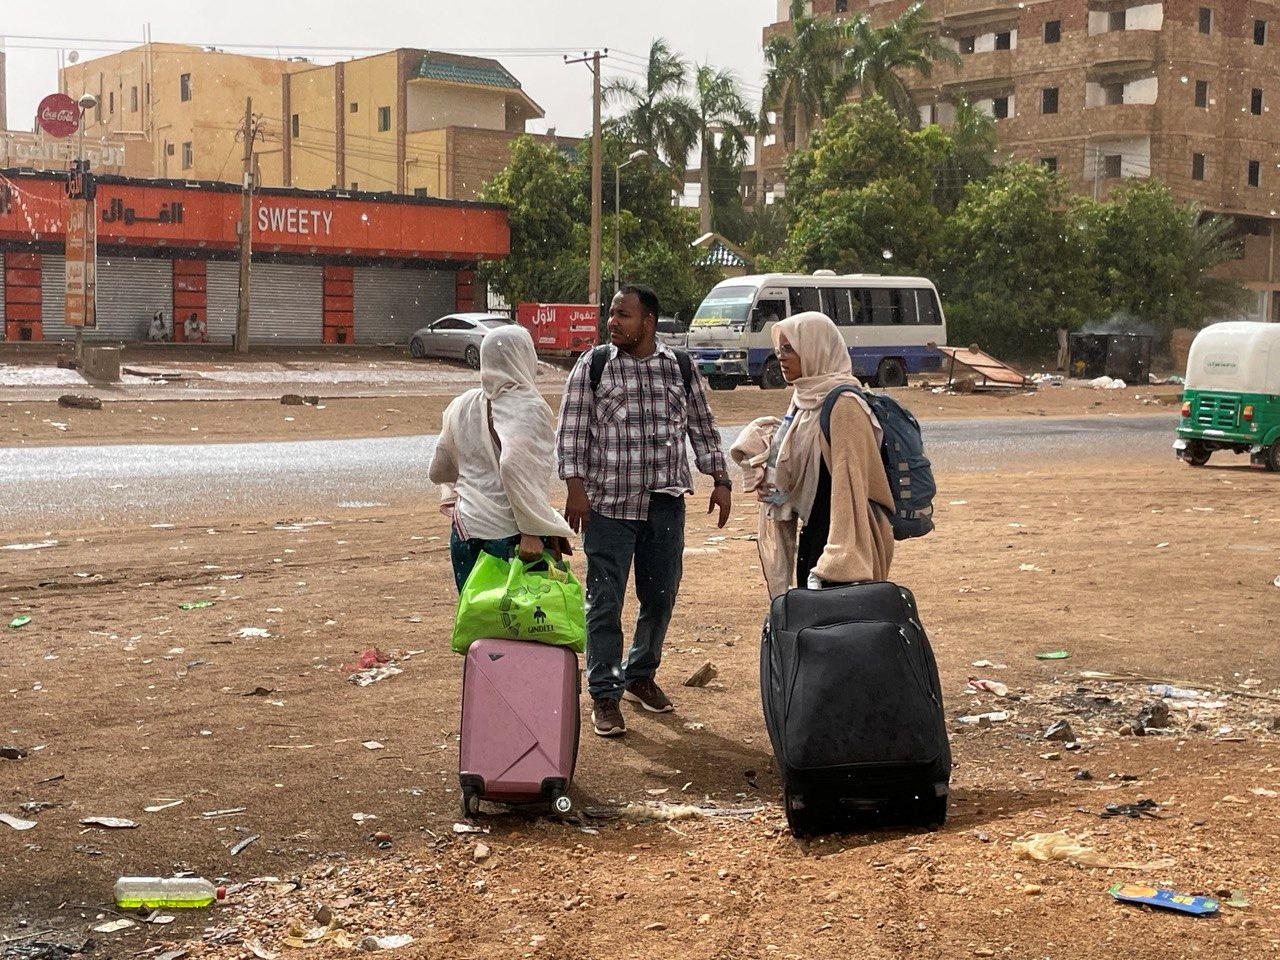 People gather as they flee clashes between the paramilitary Rapid Support Forces and the army in Khartoum, Sudan, on April 24, 2023. REUTERS/El-Tayeb Siddig